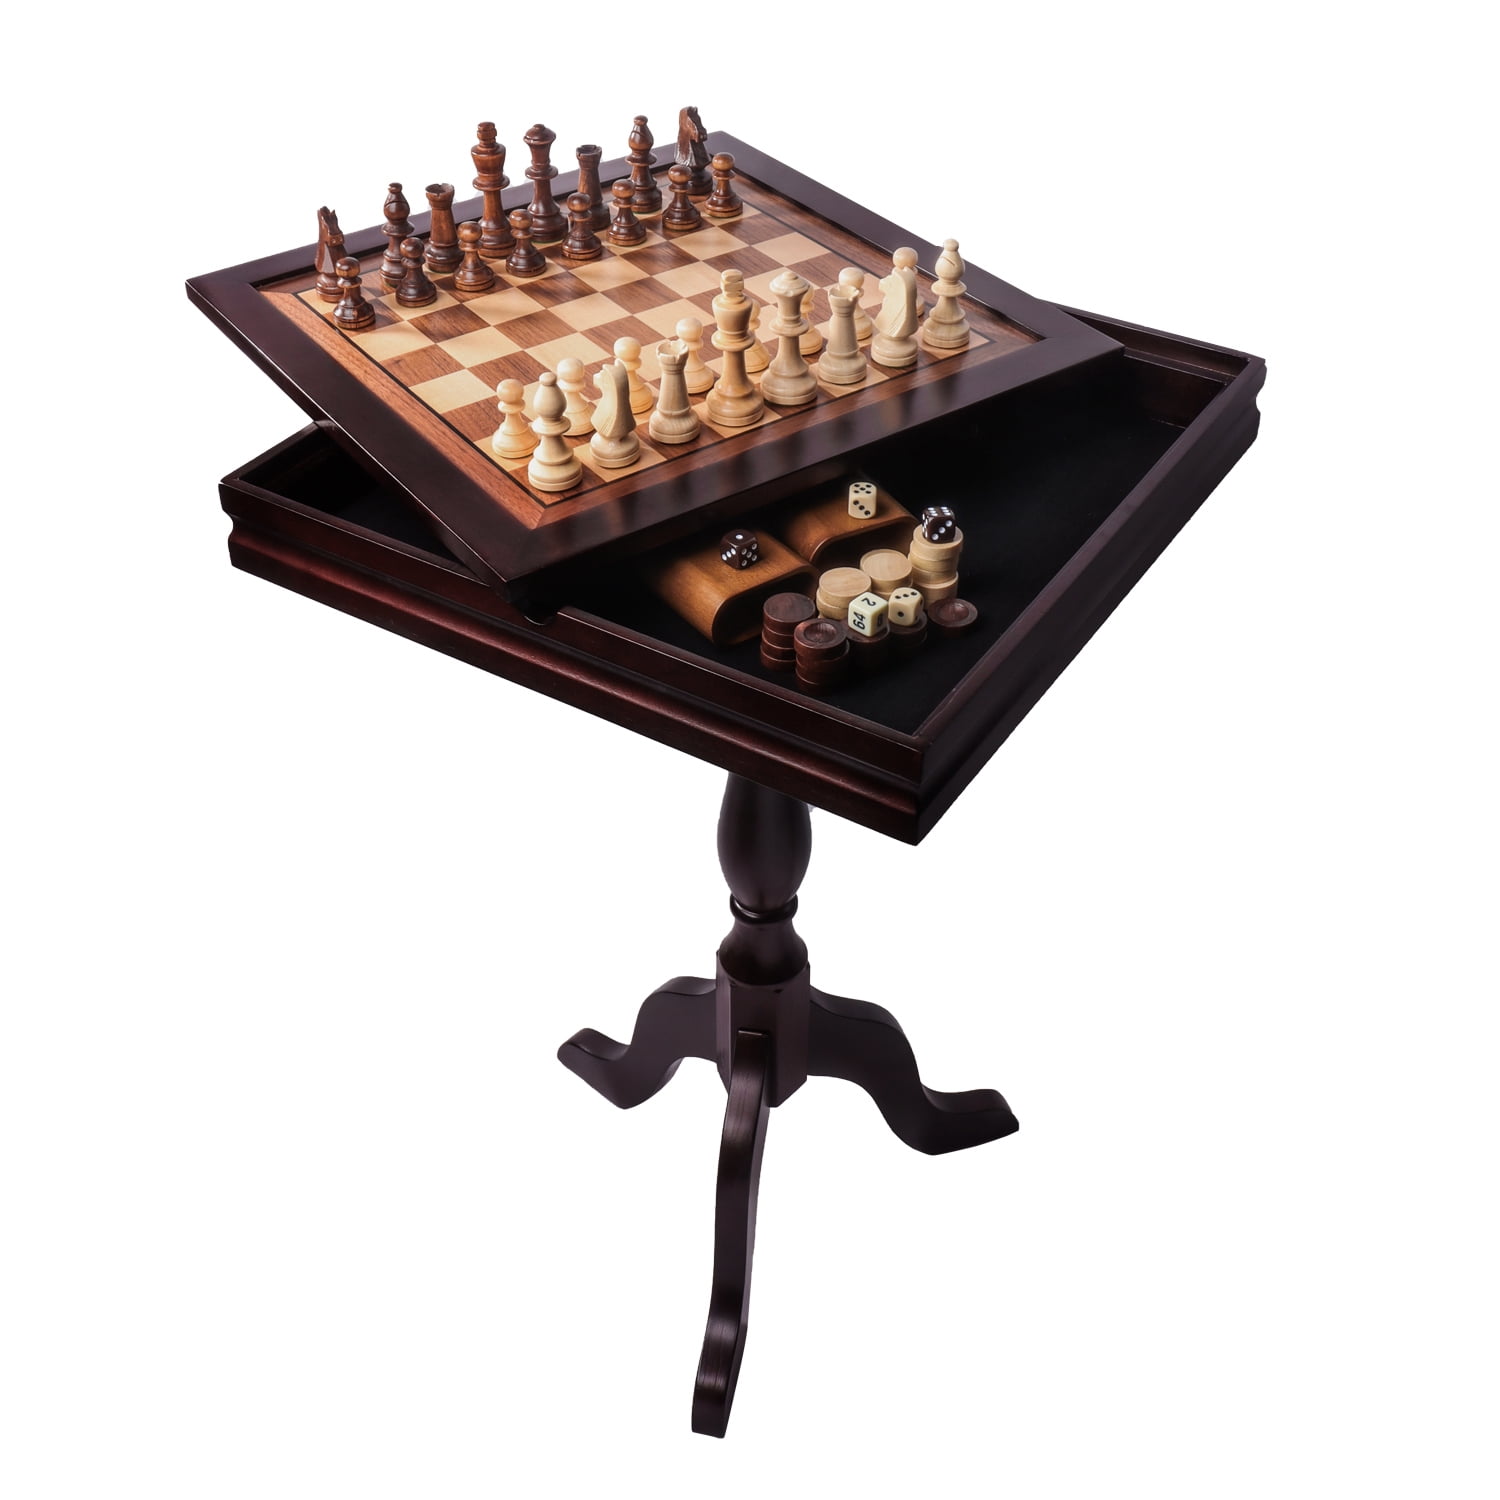 Cb games 3 In 1 Board Game Chess. Checkers And Backgammon Case